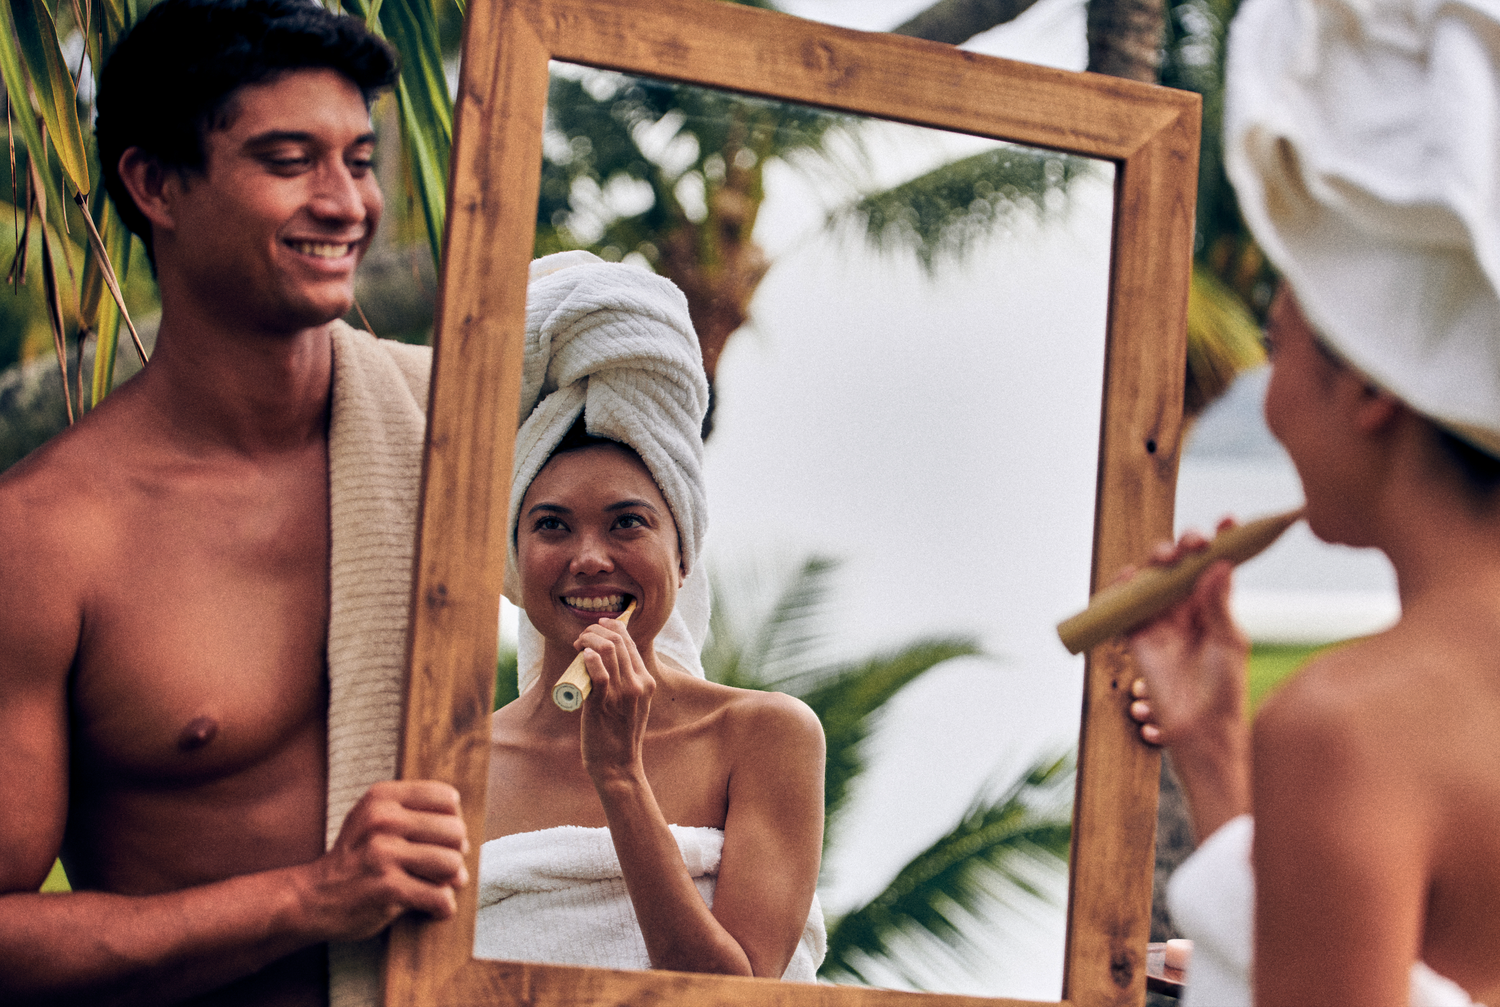 This image shows a woman brushing her teeth outside while looking into a mirror that a shirtless man is holding. She is using toothpaste tablets and brushing with an electric bamboo toothbrush. These are a part of Desesh's range of zero waste, plastic free, eco friendly, more sustainable personal care and everyday essential products.